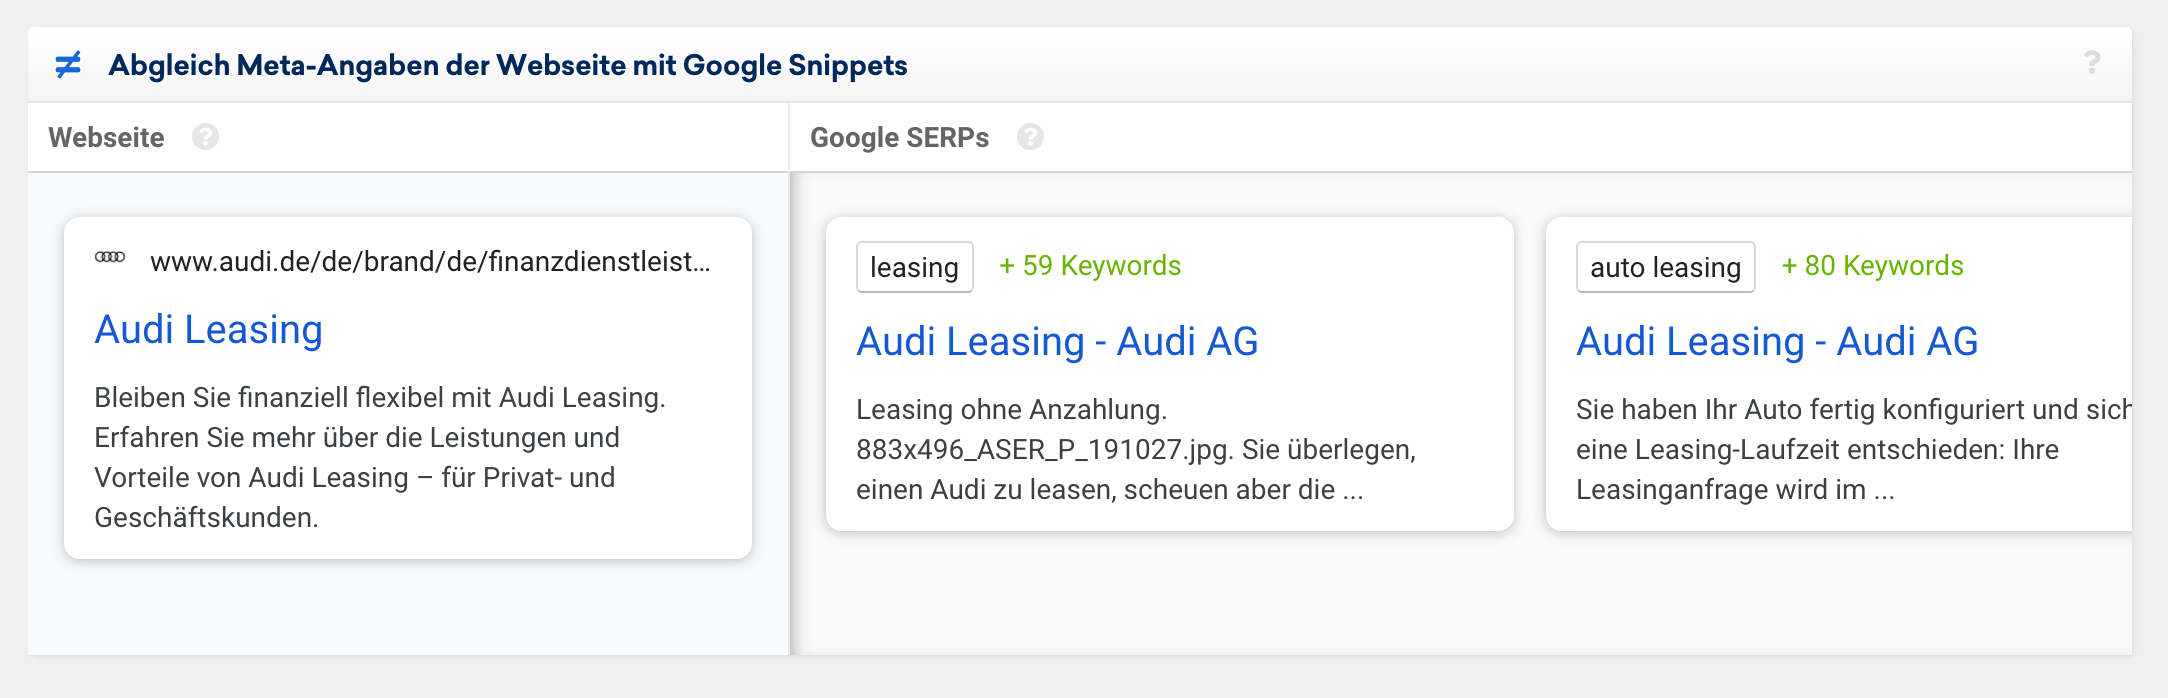 Googles shows the file names of images that can be found on the page of Audi's German website.